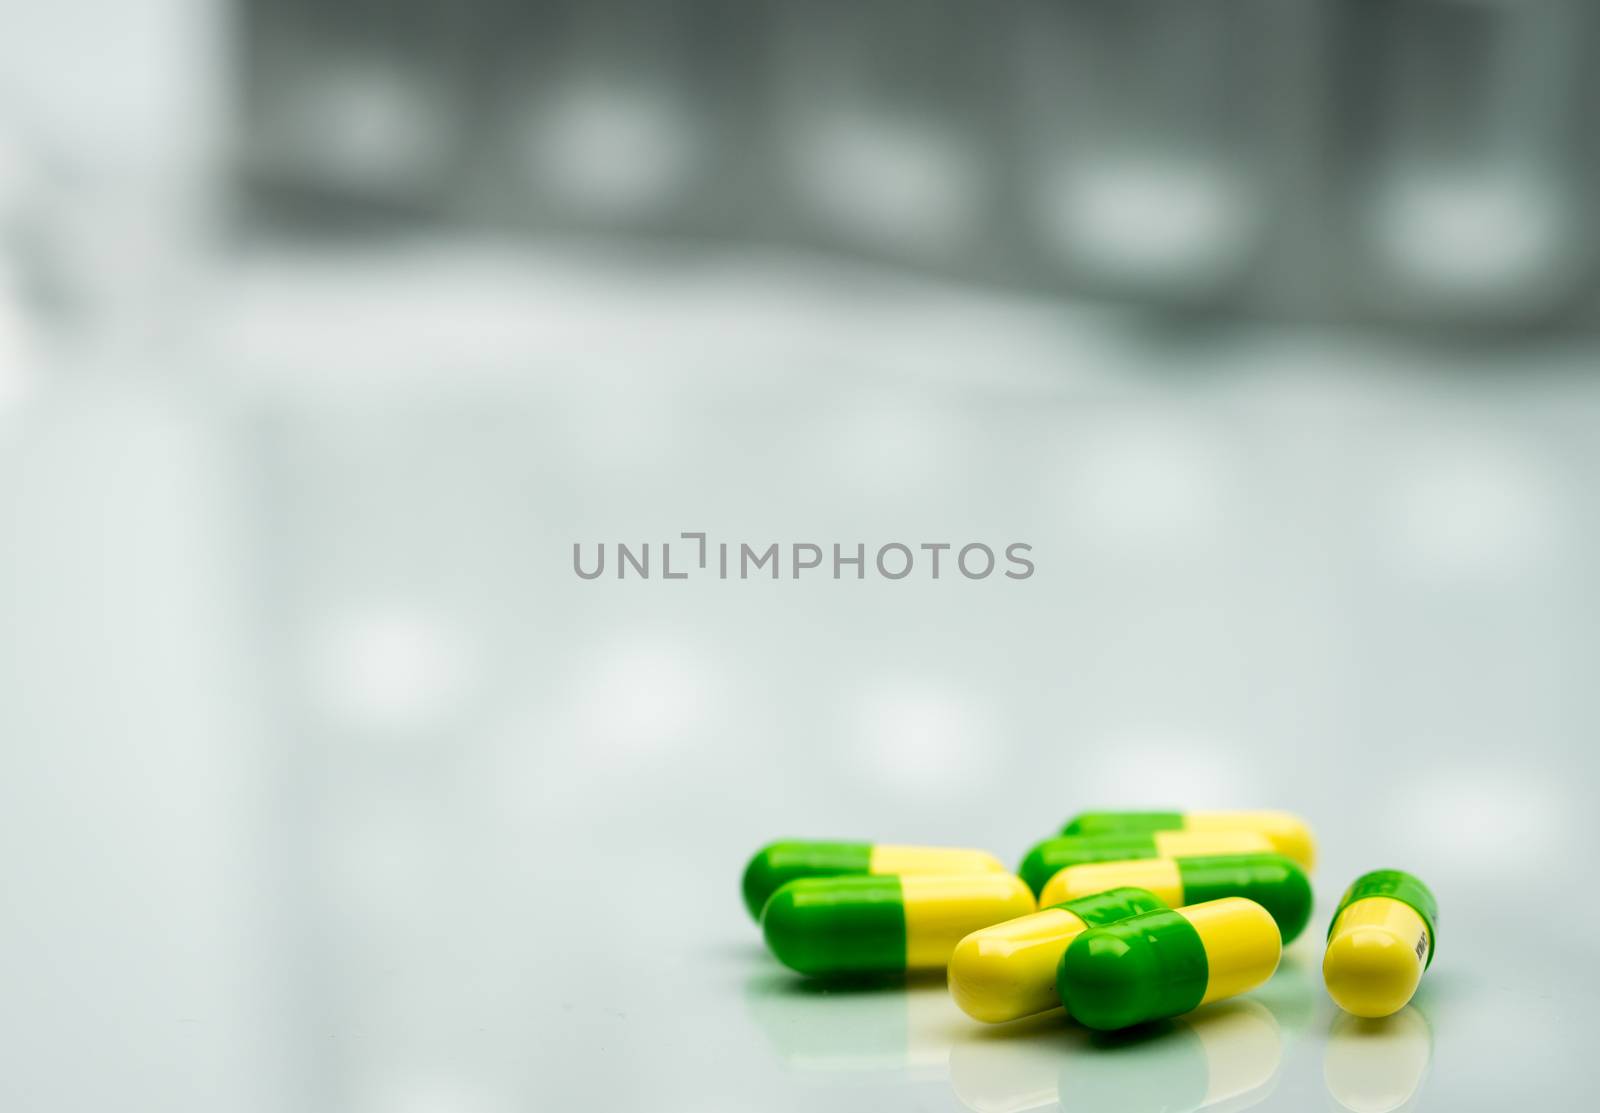 Green, yellow tramadol capsule pills on blurred silver blister pack background with copy space. Cancer pain management. Opioid analgesics. Drug abuse in teenage. Pharmaceutical industry. Pharmacy background. Global healthcare concept. by Fahroni